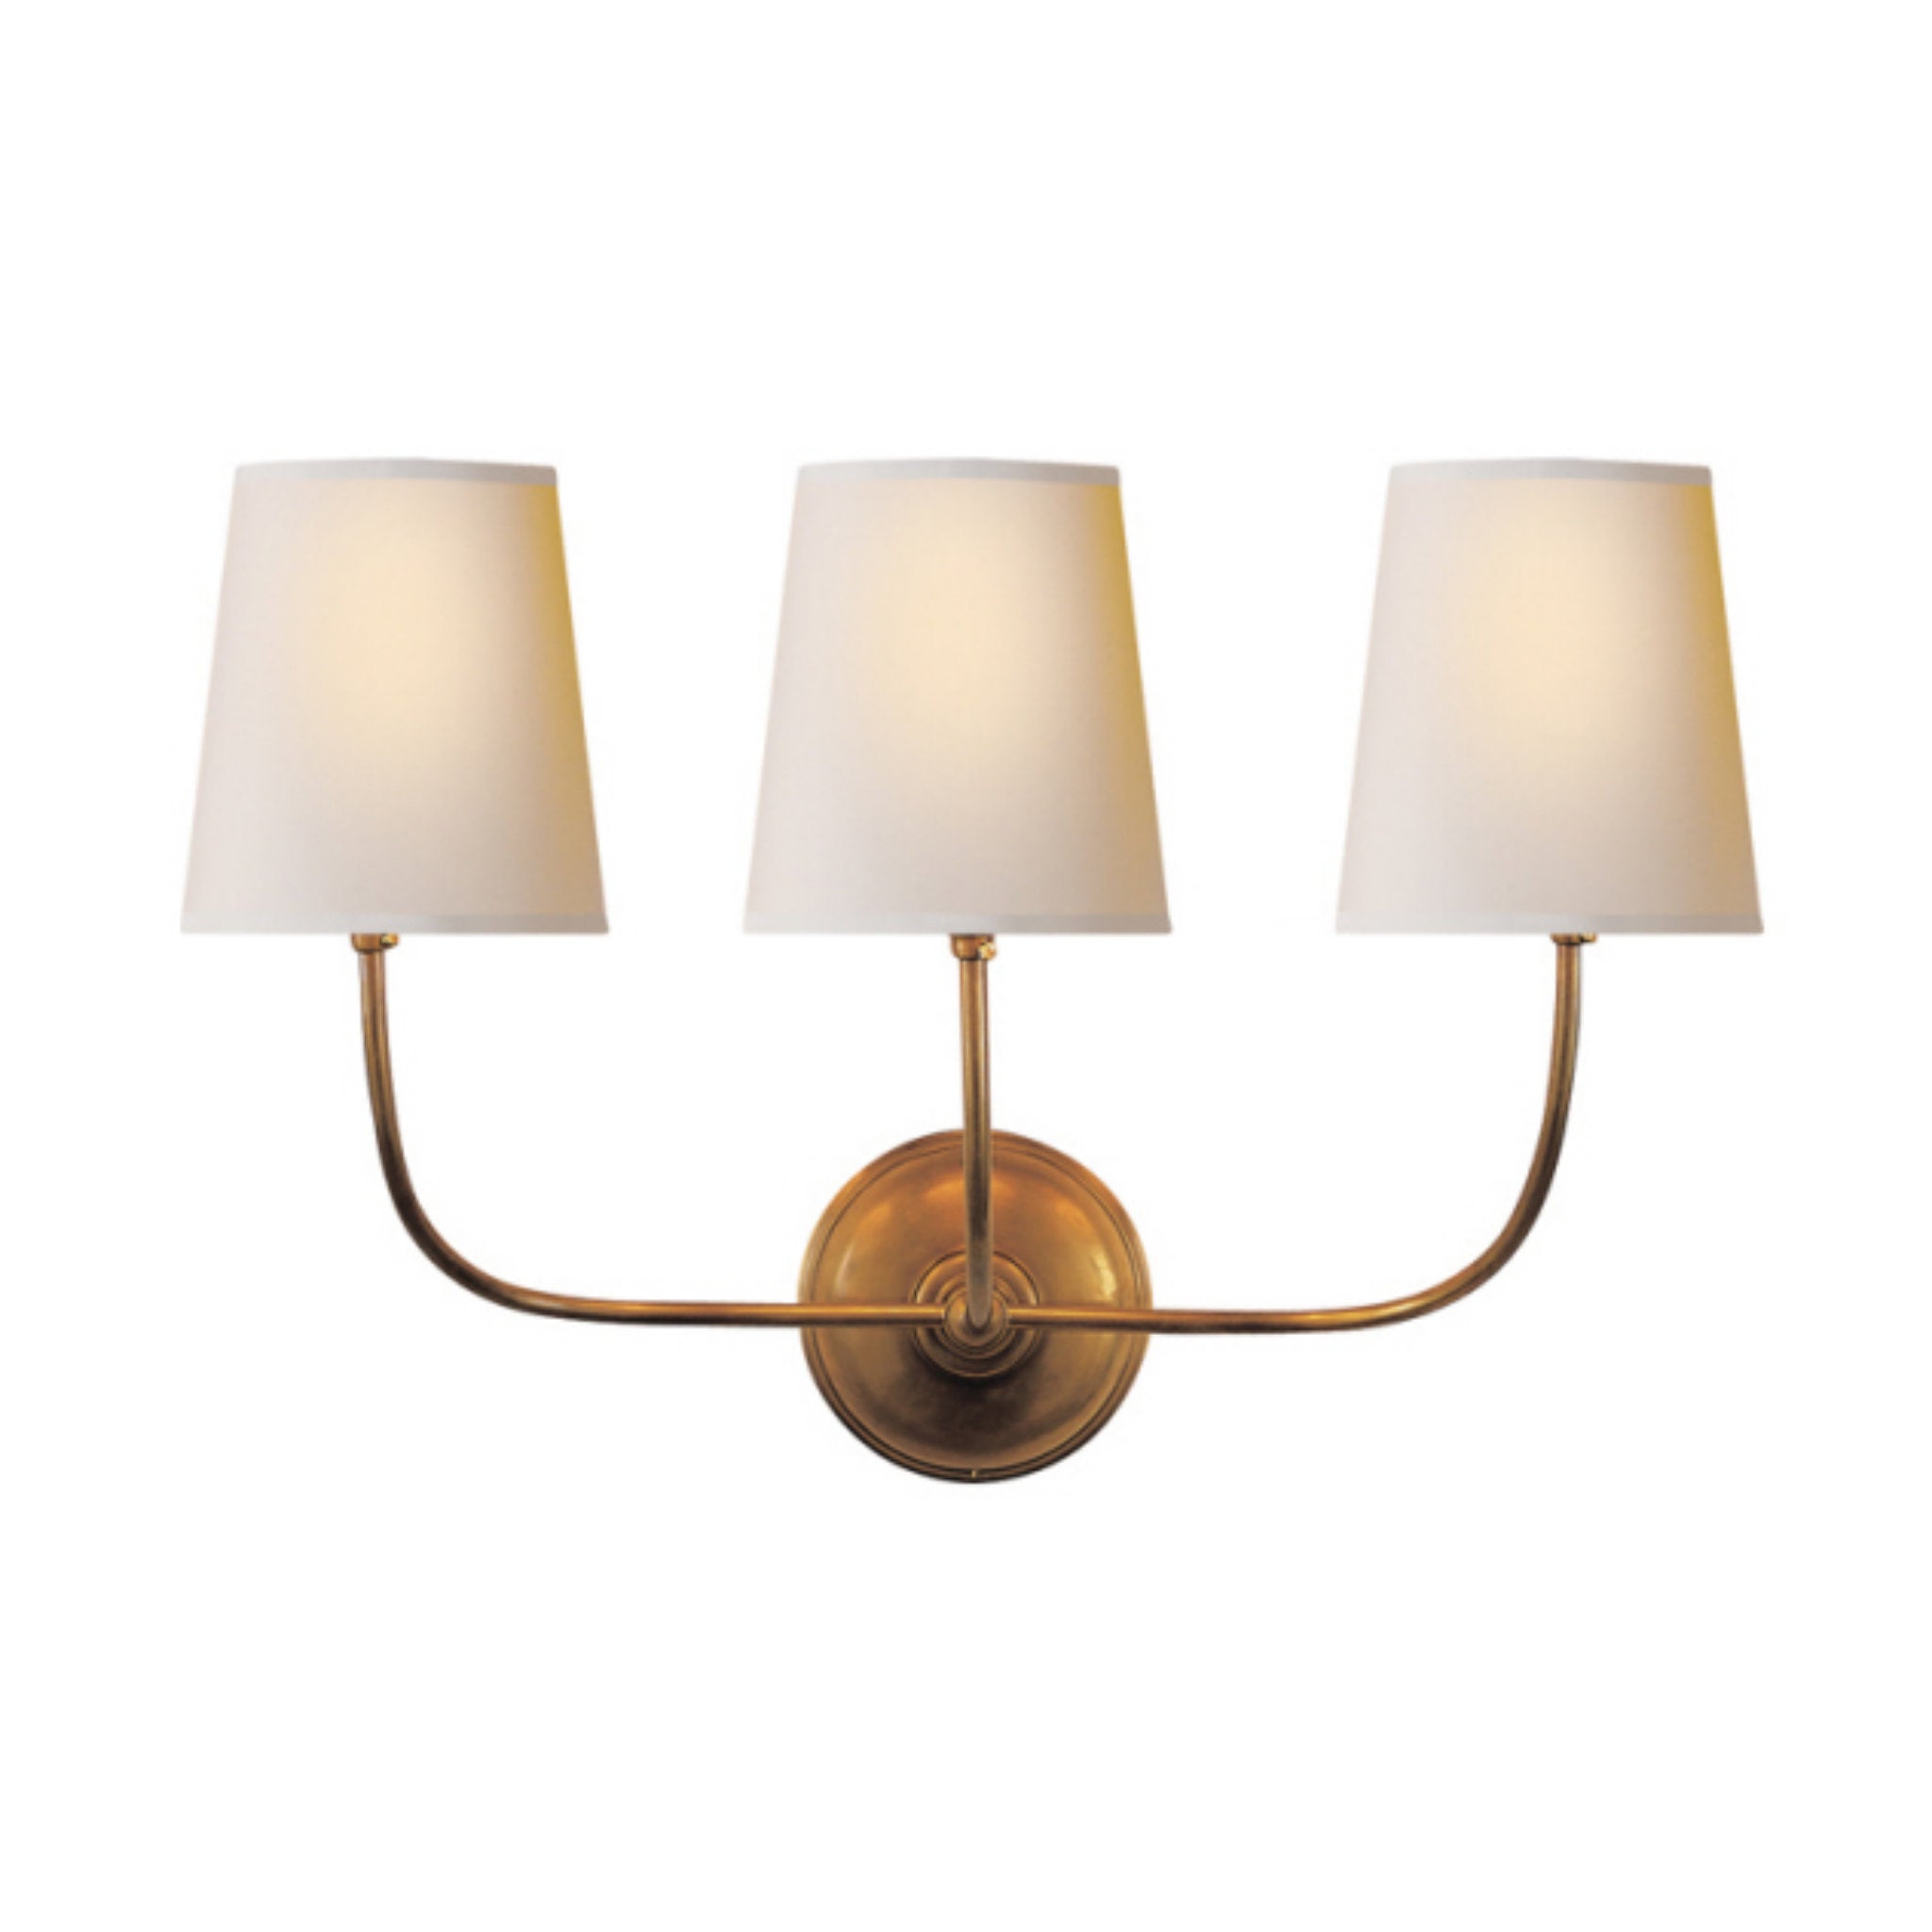 Keira LED Wall Wash LightBronze/Hand-Rubbed Antique Brass